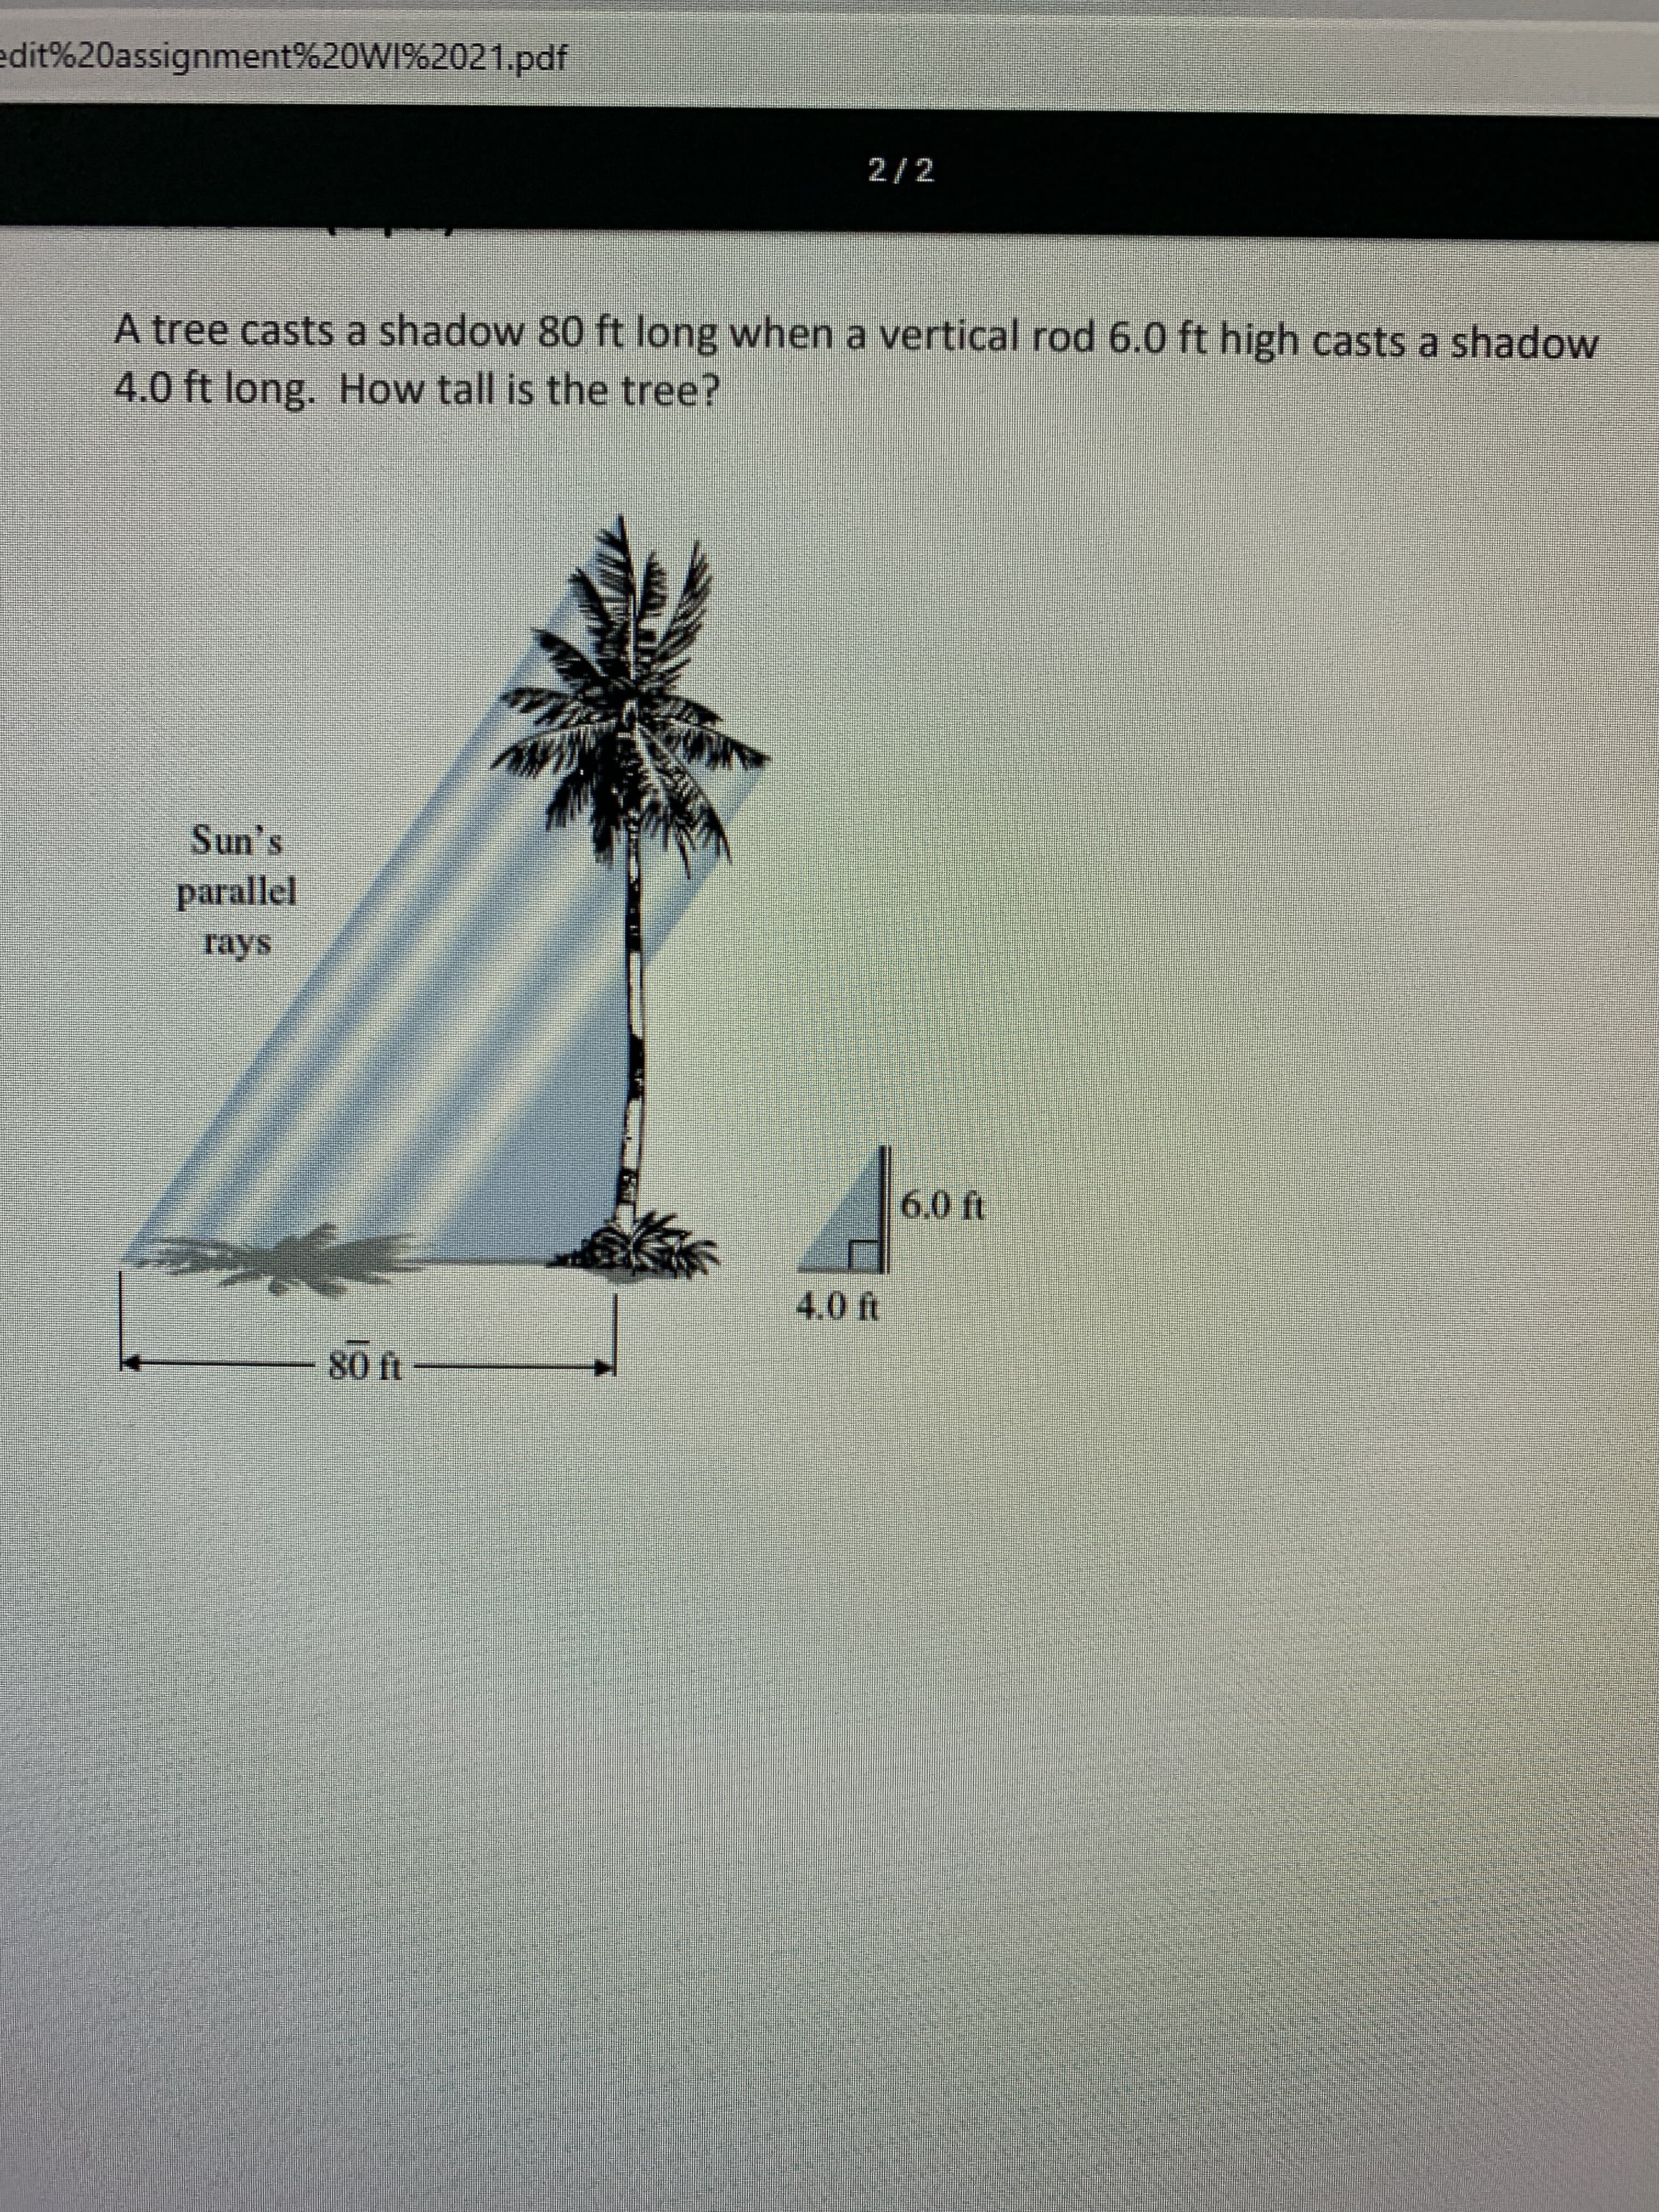 A tree casts a shadow 80 ft long when a vertical rod 6.0 ft high casts a shadow
4.0 ft long. How tall is the tree?
